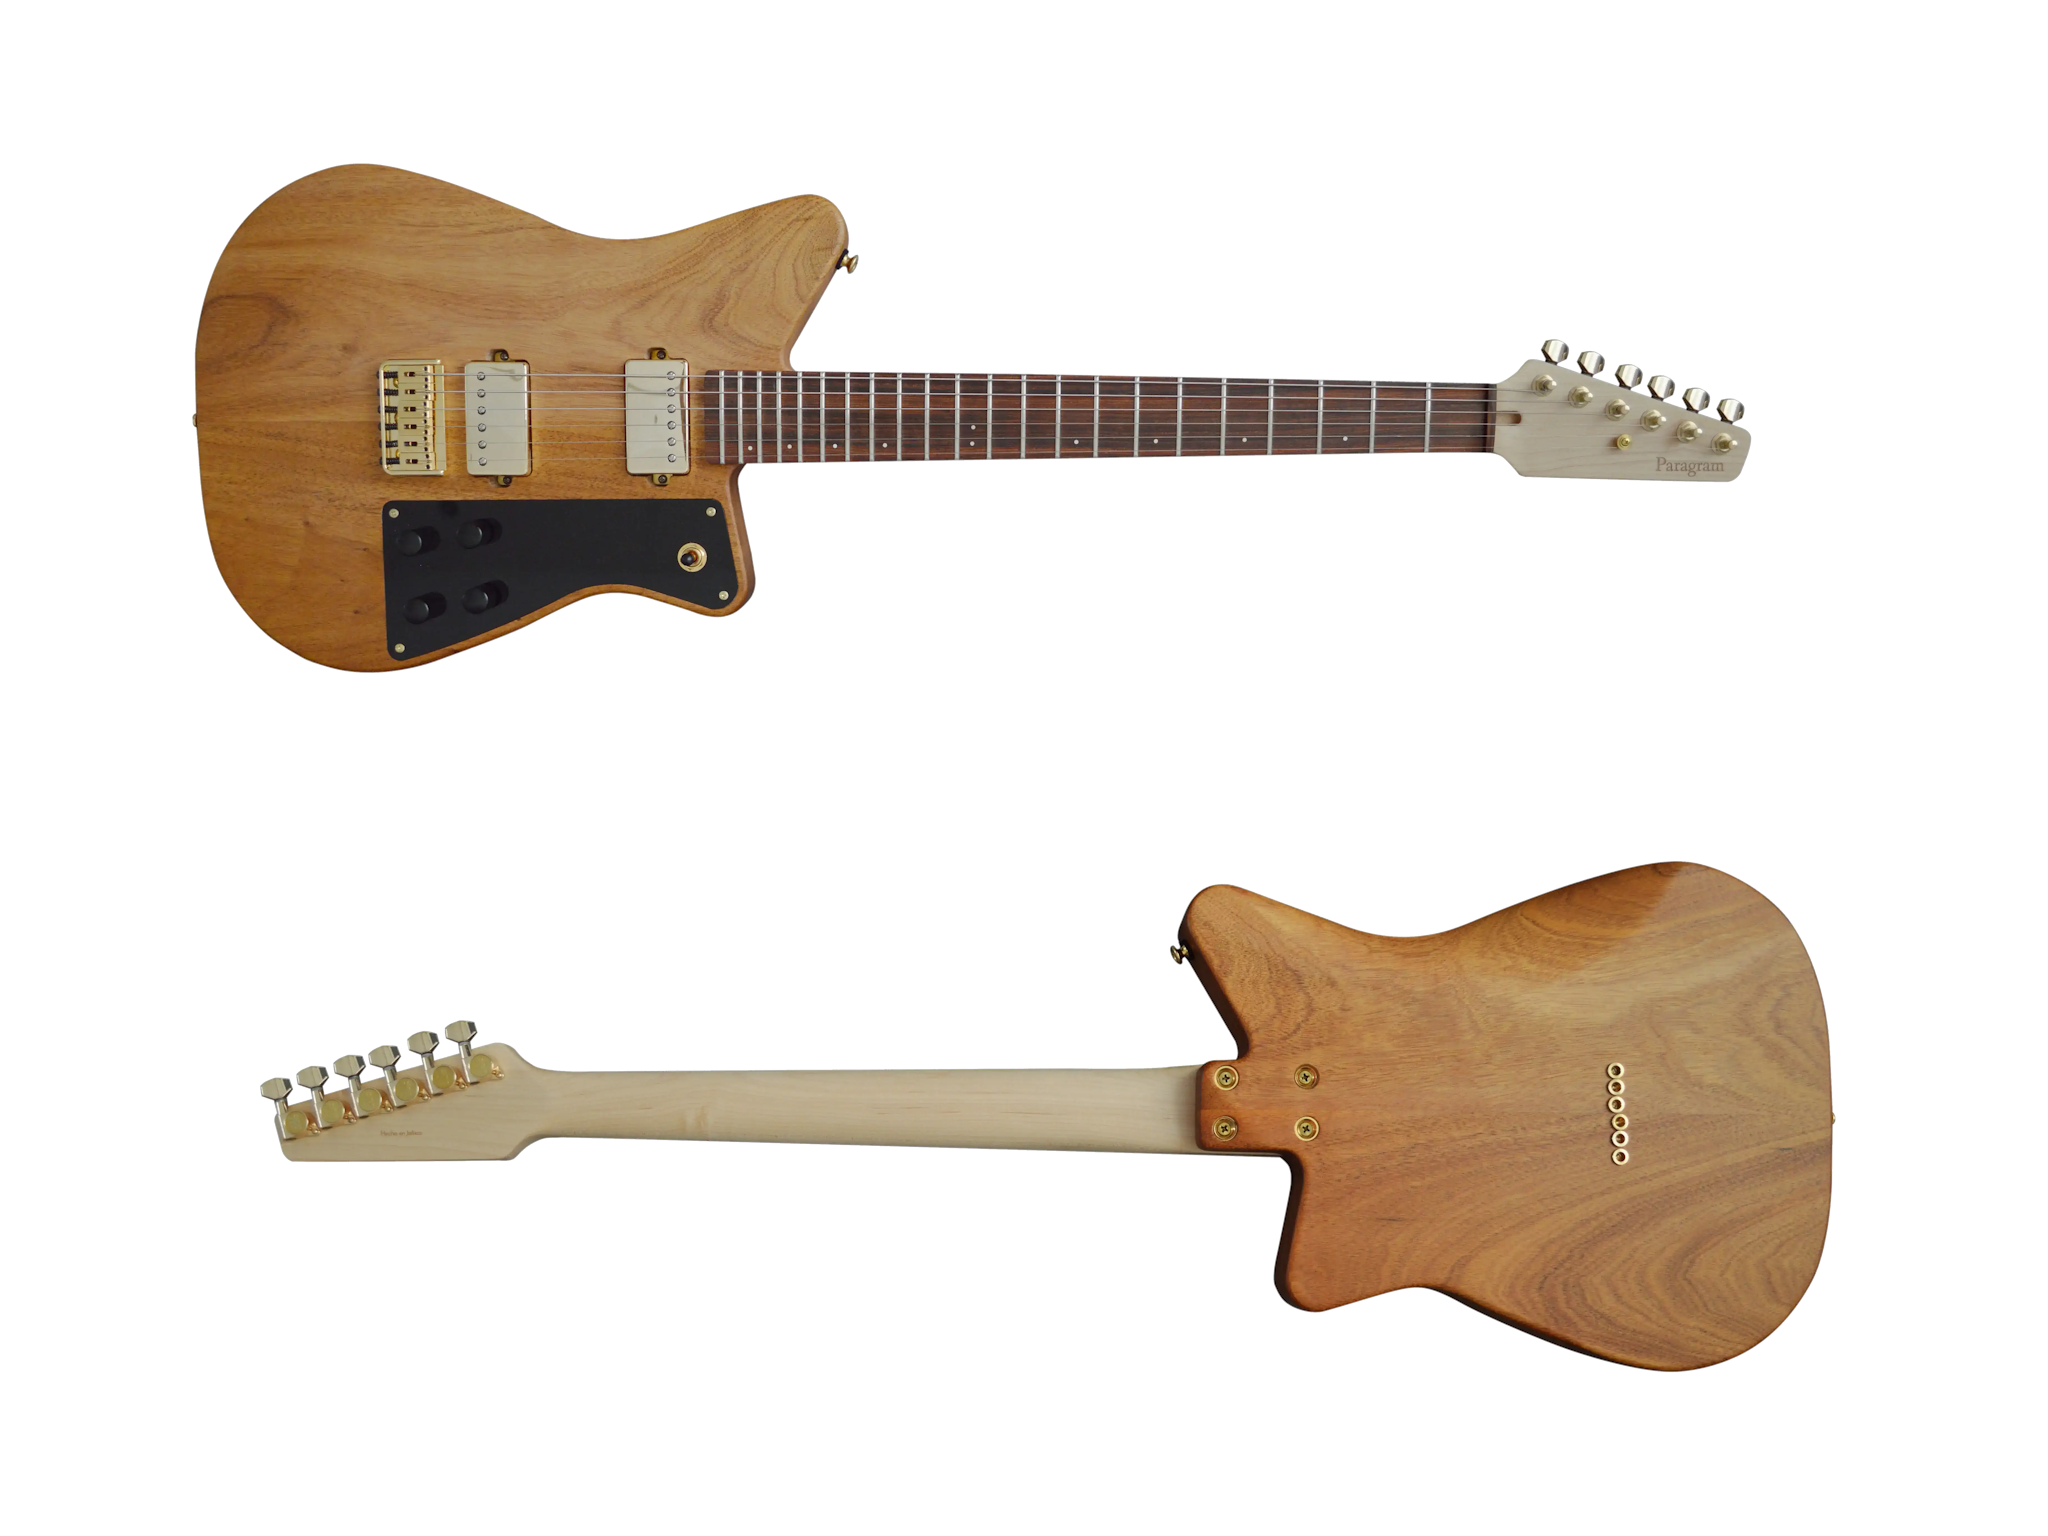 The original Paragram model is a solid-body, bolt-on construction, offering comprehensive customization options. You have the freedom to select from an array of pickup configurations and hardware, in addition to choosing from a diverse selection of woods.